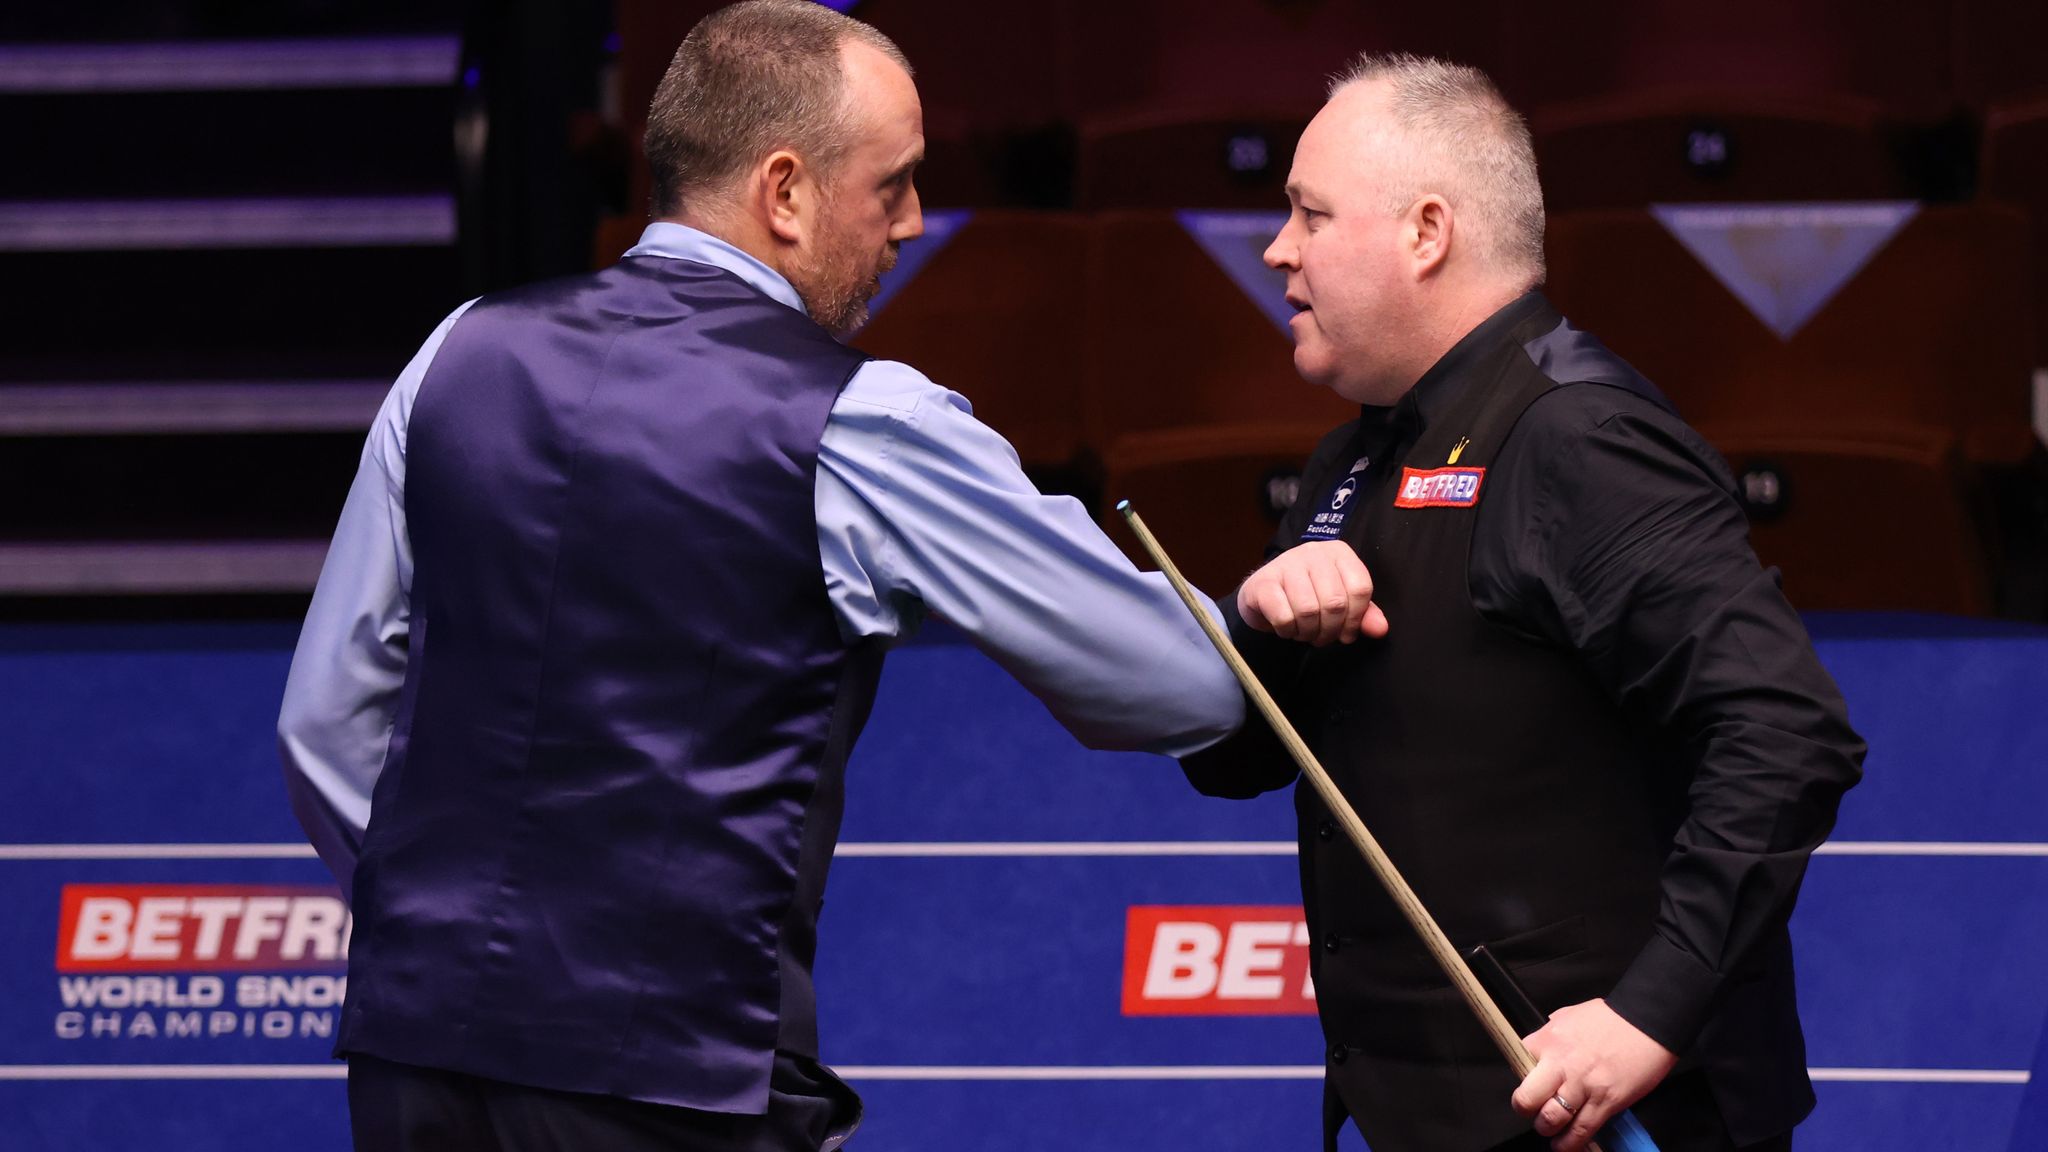 World Snooker Championship Mark Williams insists he cannot win fourth crown despite defeating John Higgins Snooker News Sky Sports